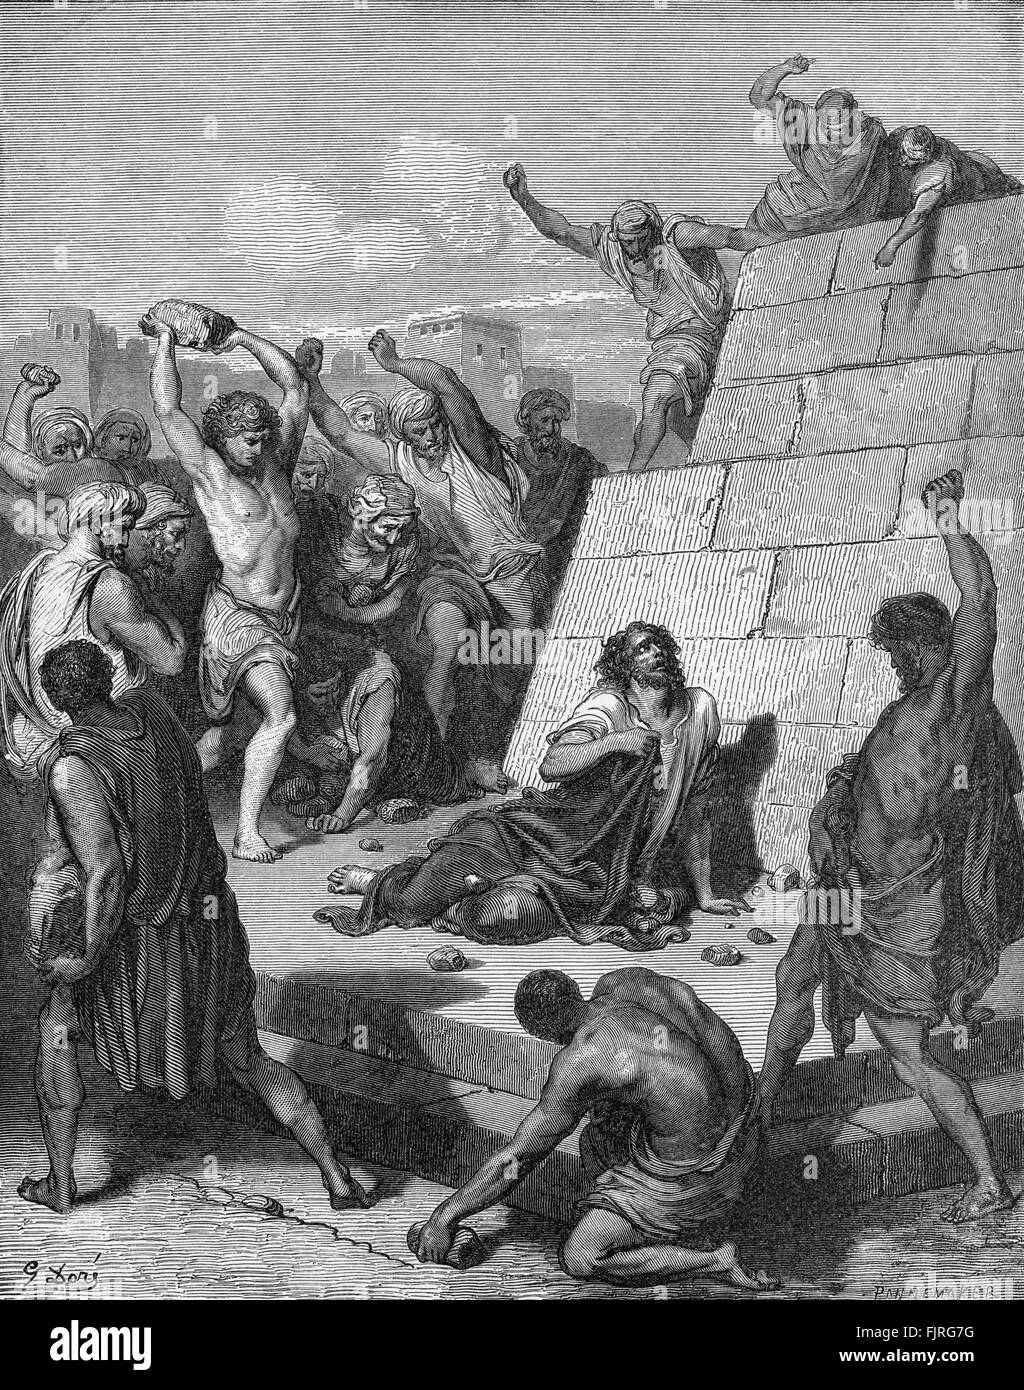 Martyrdom of St Stephen (Acts of the apostles chapters VI and VII), illustration by Gustave Doré (1832 – 1883) Stock Photo